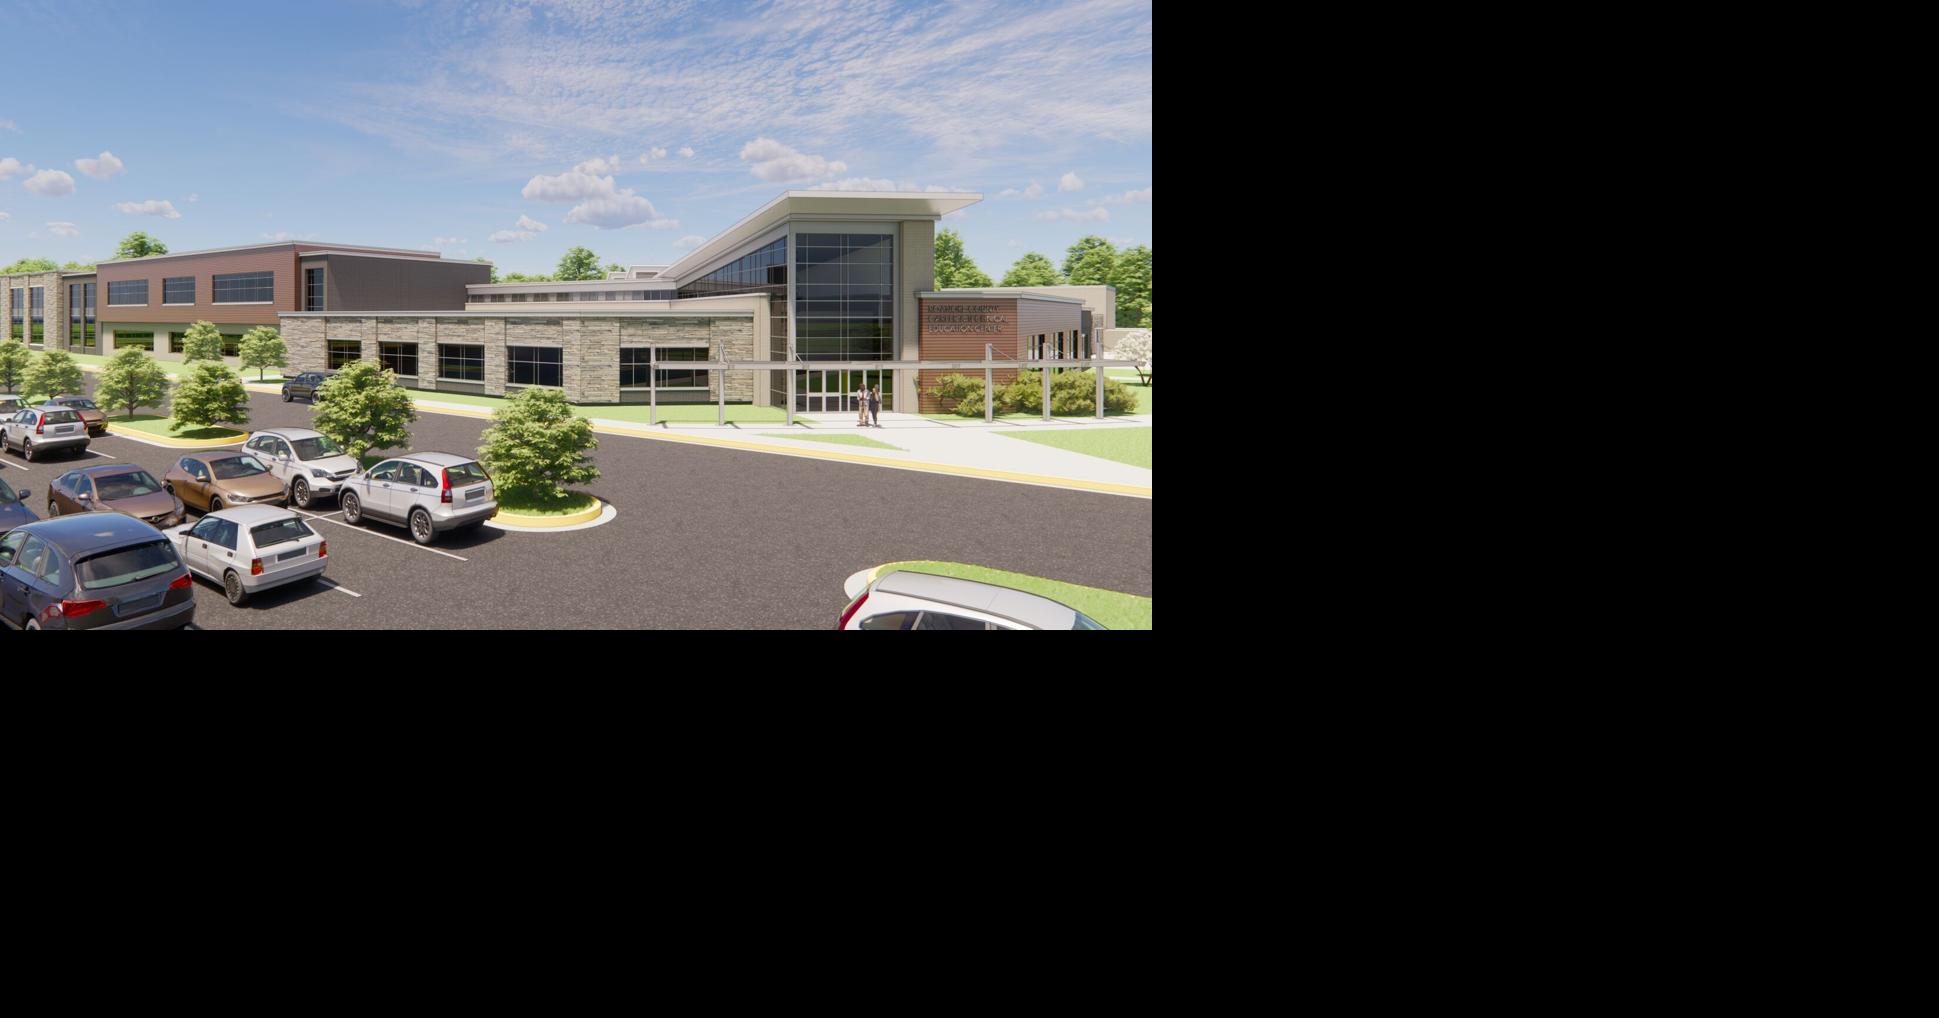 New Technology Education Center Named in Roanoke County